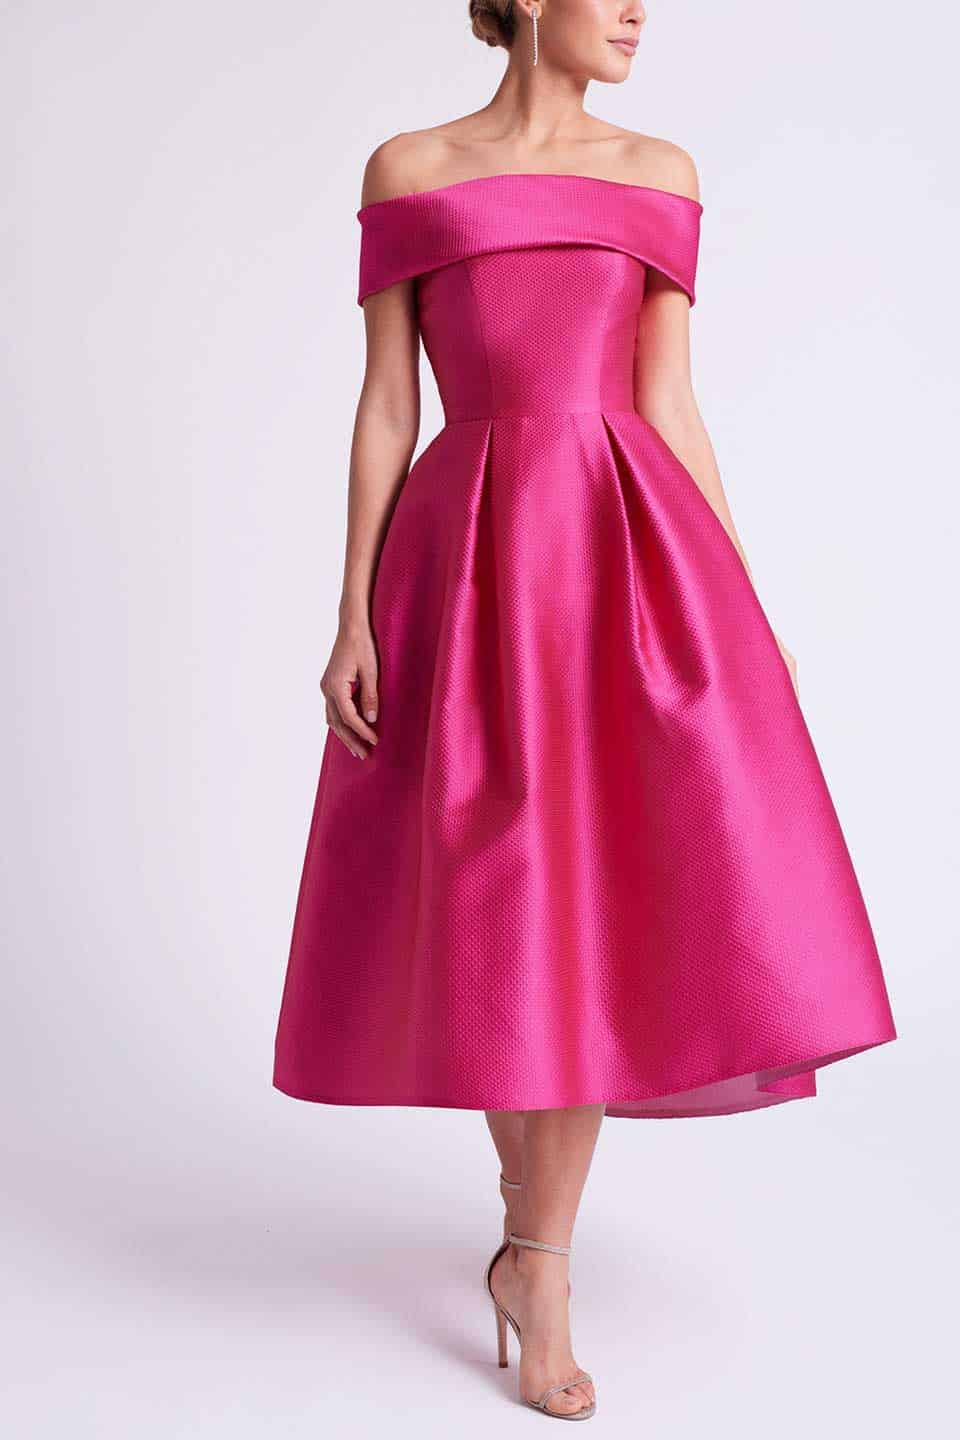 Featured image for “Abendmode Rosa Clara | Abendkleid 7T113-A”